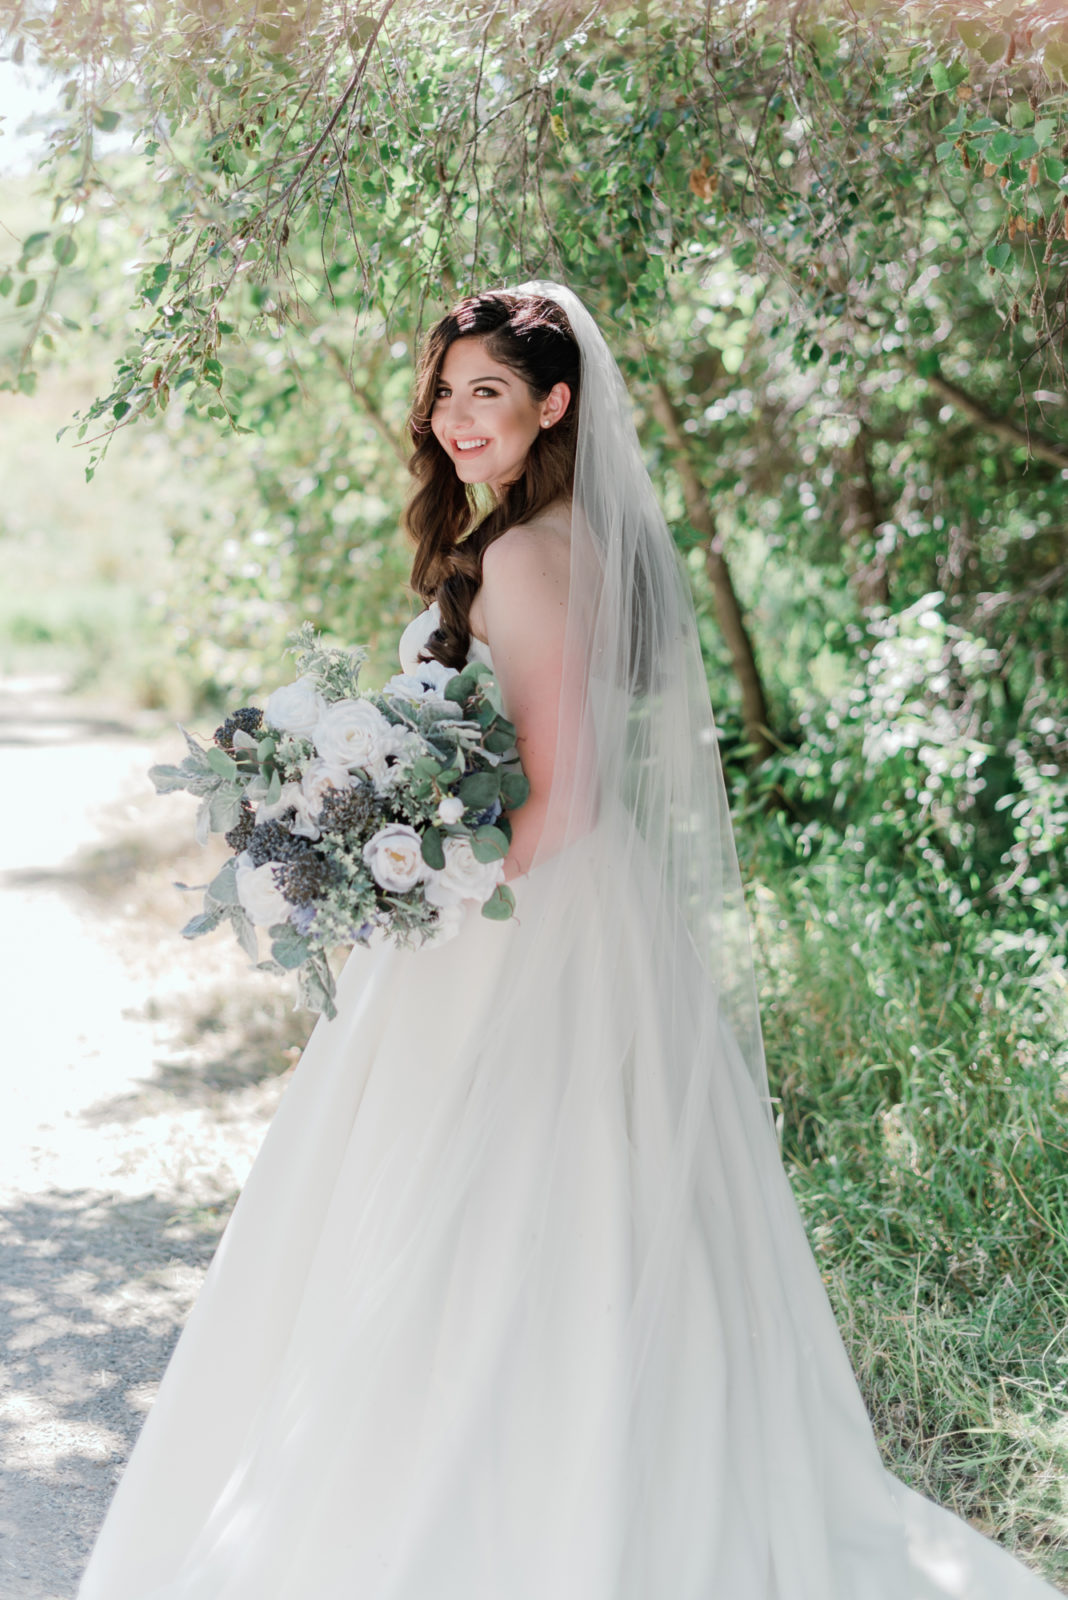 Bridal inspiration for an ethereal garden wedding in a park